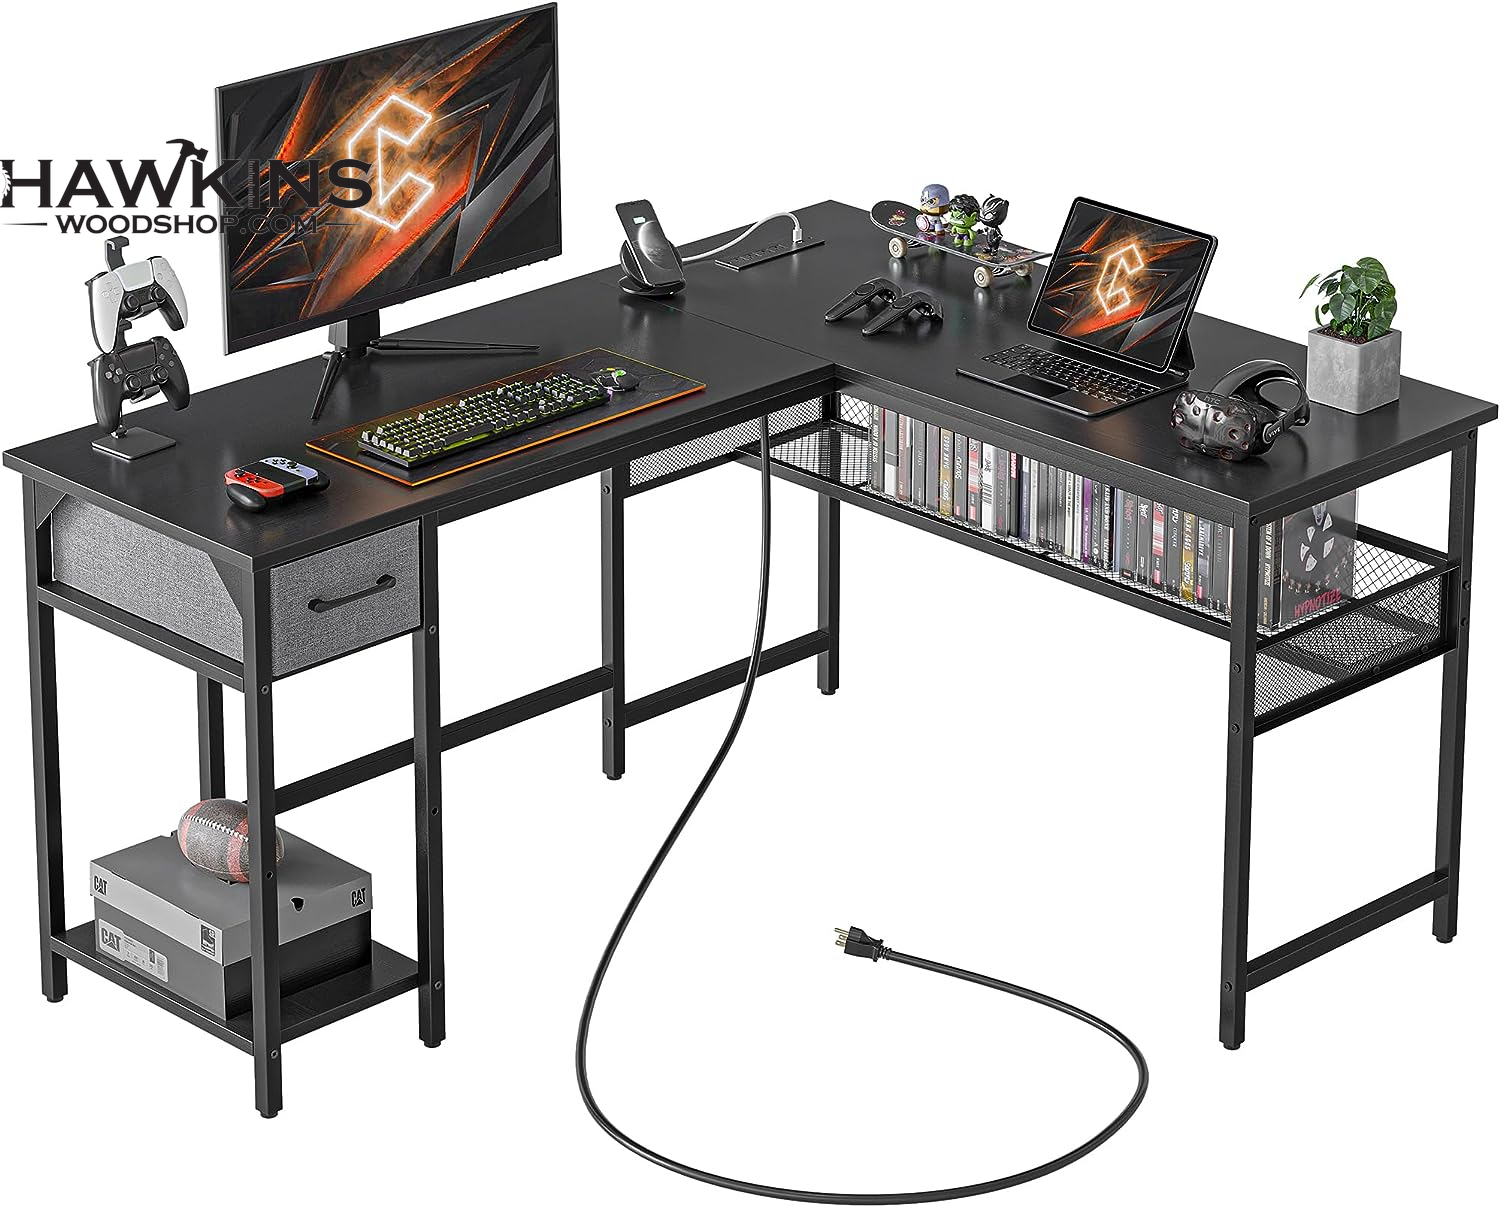 The GG Gaming Desk Rustic Meets Industrial, Solid Wood, Heavy Duty Gaming  Desk 